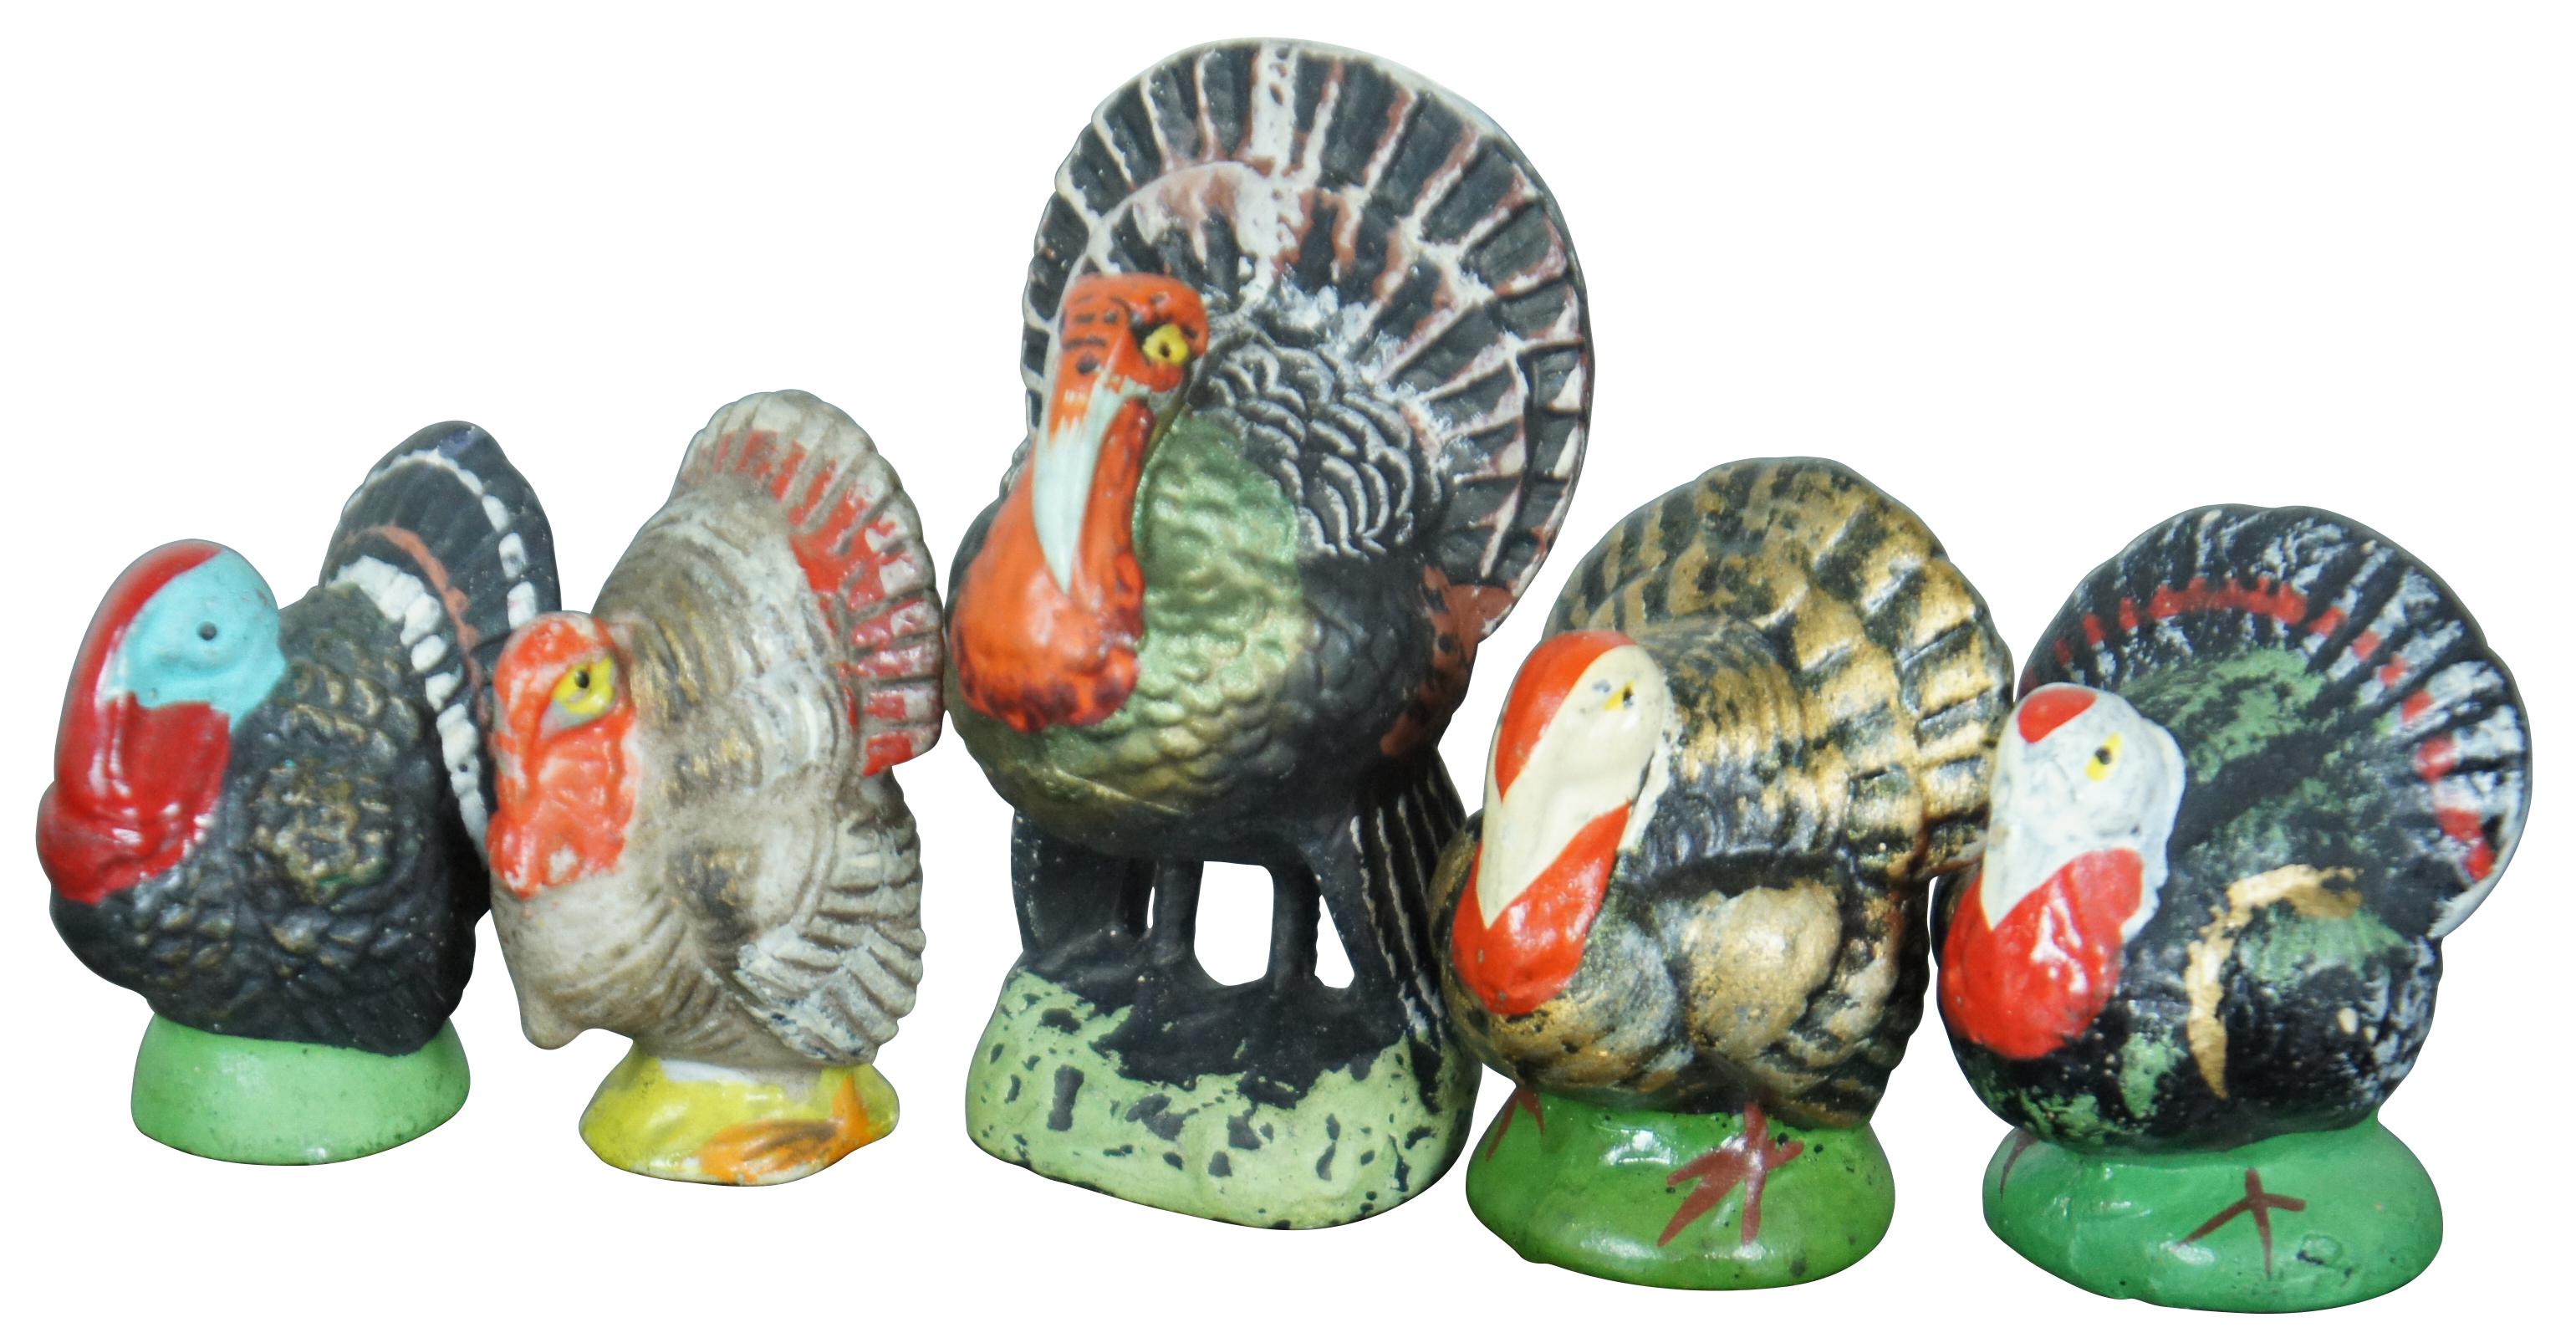 Lot of nine small antique/vintage Thanksgiving turkey shaped candy containers, seven composition and two ceramic; made in Japan.

Measures: Largest - 2.25” x 2” x 3.25” / Smallest - 1.75” x 1.5” x 2” (Width x Depth x Height).